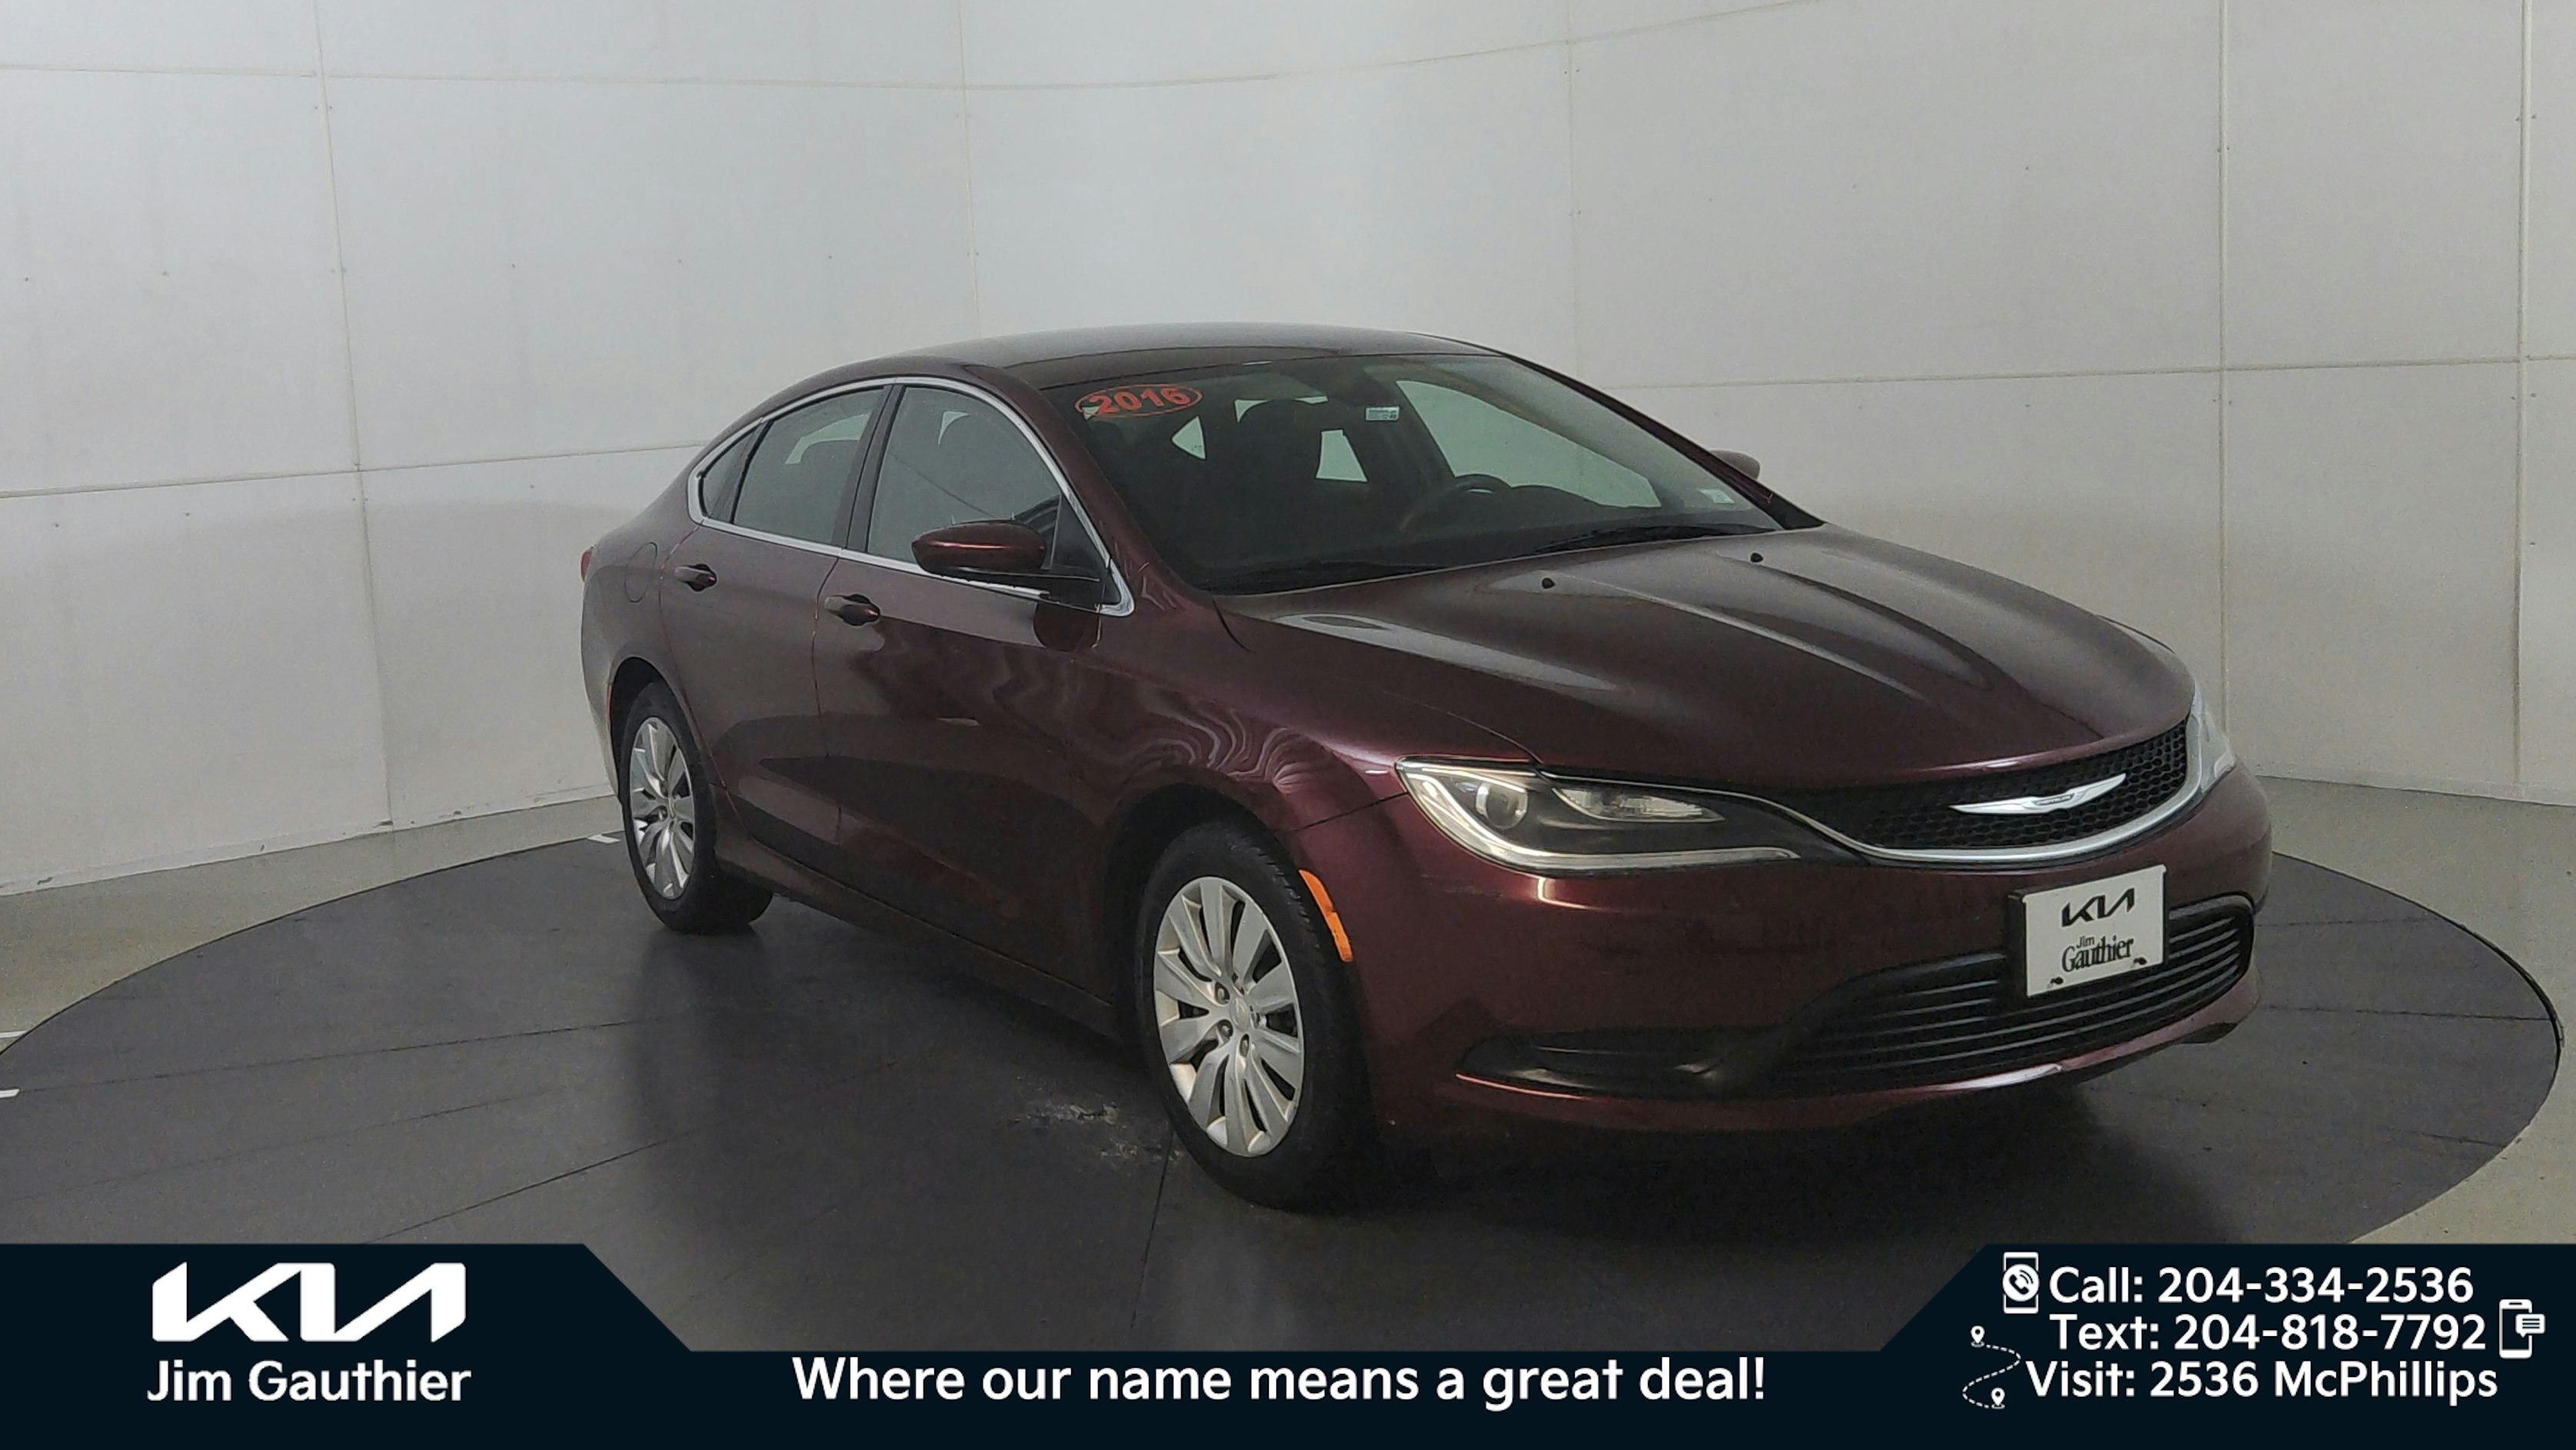 2016 Chrysler 200 LX FWD, Accident free, low km, local trade